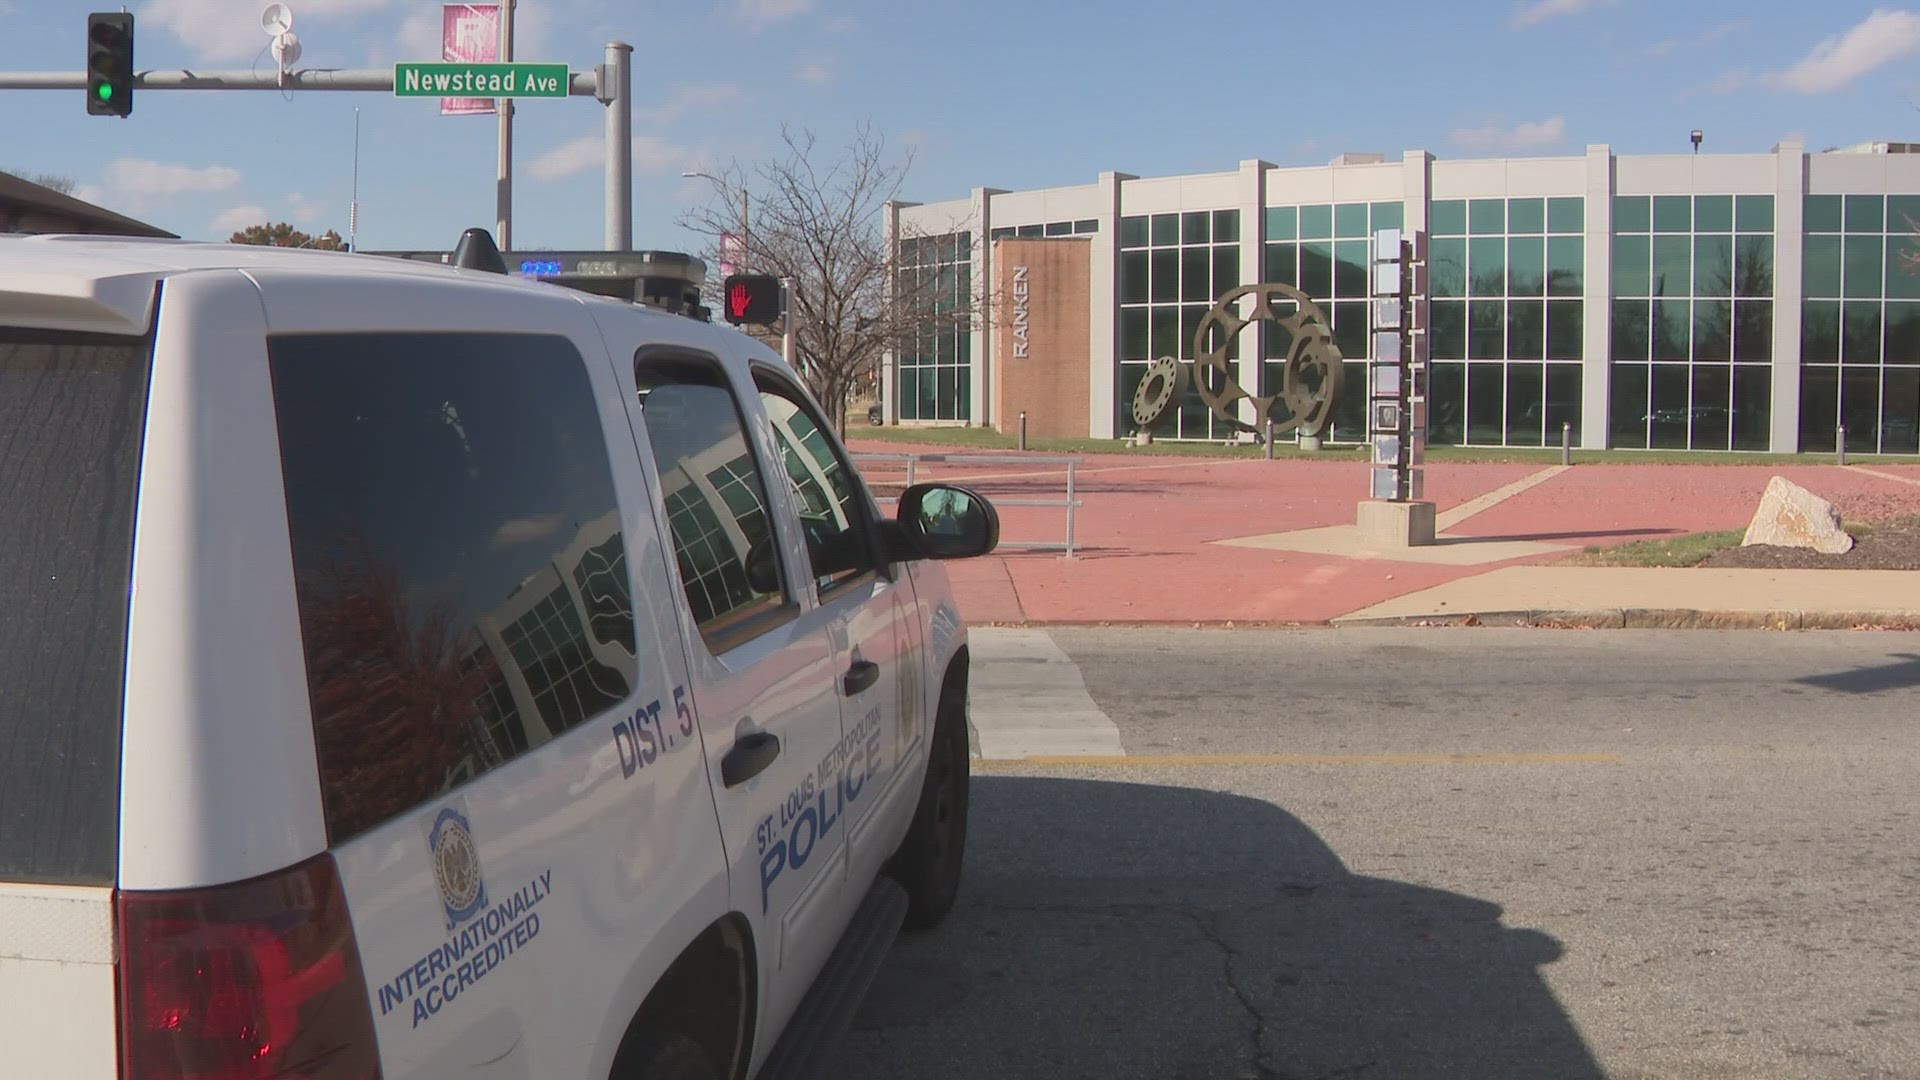 Ranken Technical College students received an alert Wednesday morning that read, "Active shooter - THIS IS NOT A TEST."